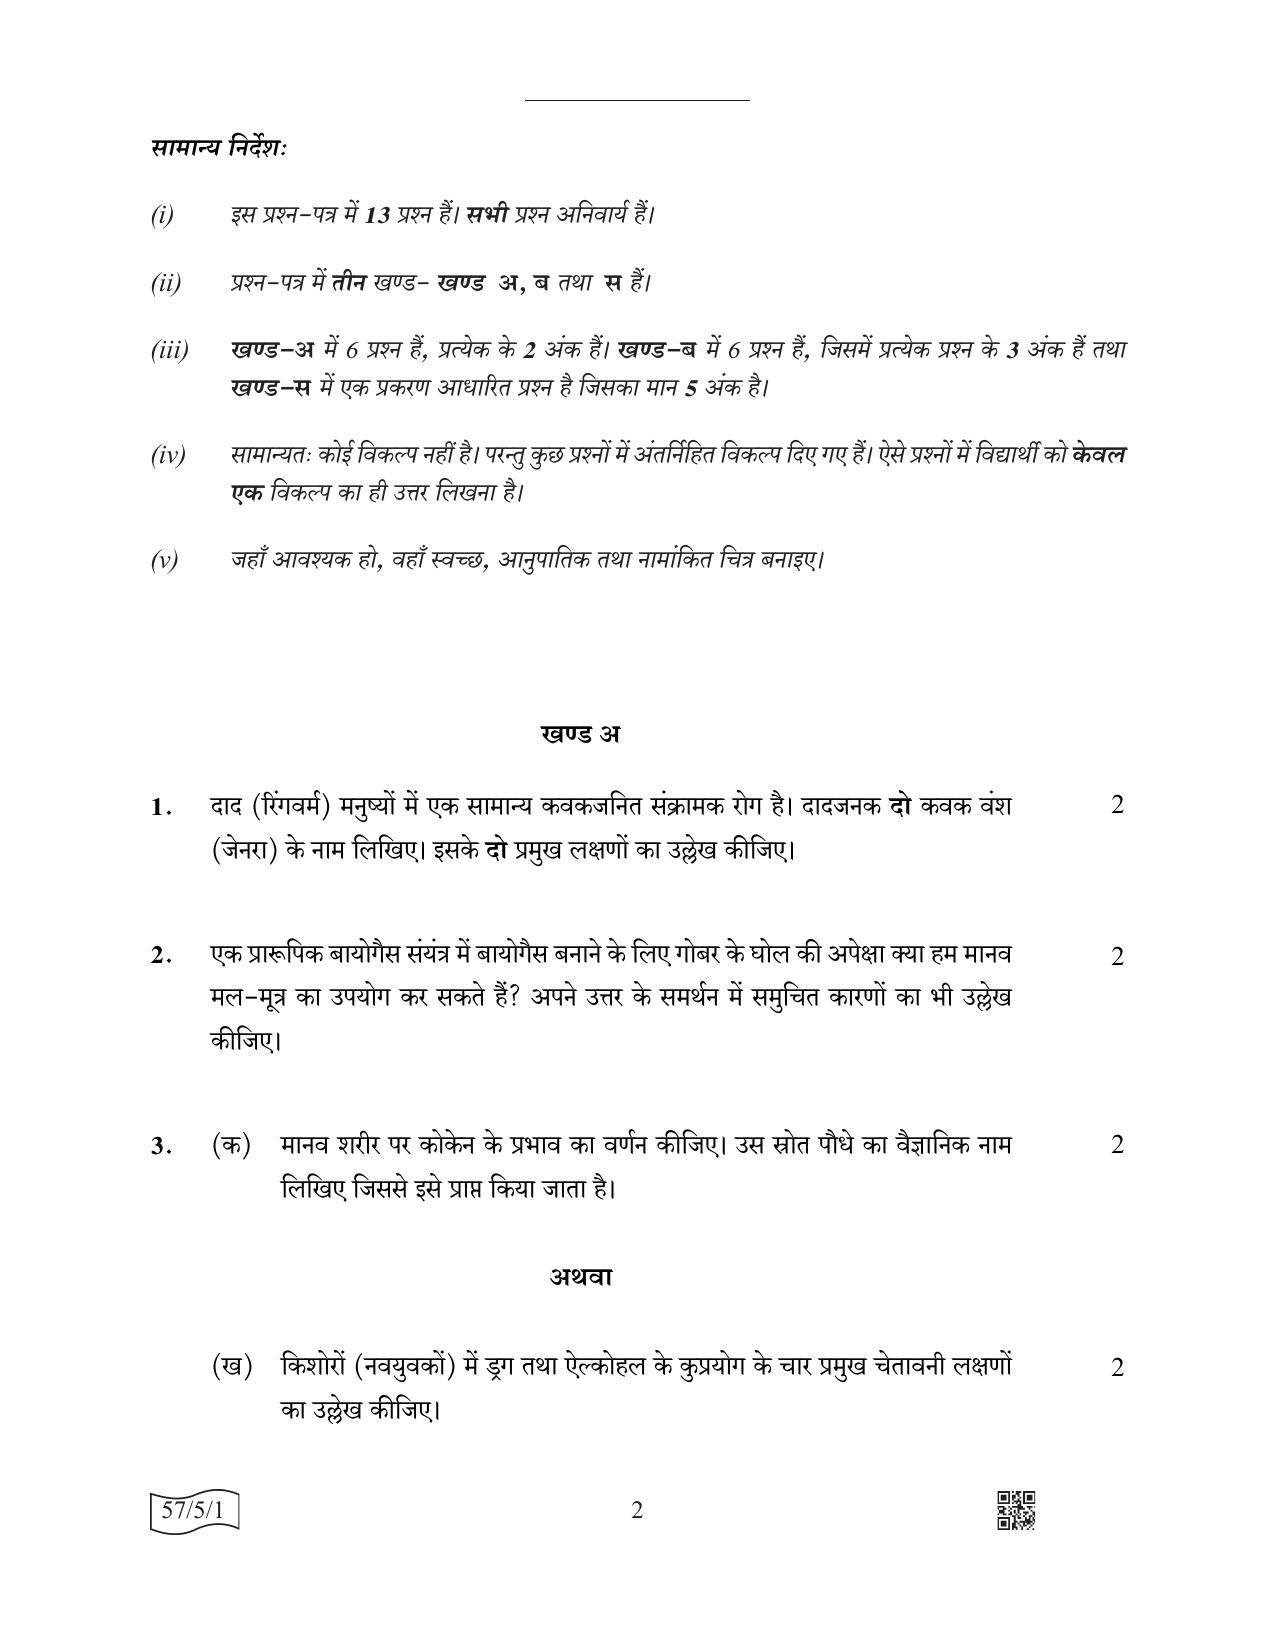 CBSE Class 12 57-5-1 Biology 2022 Question Paper - Page 2